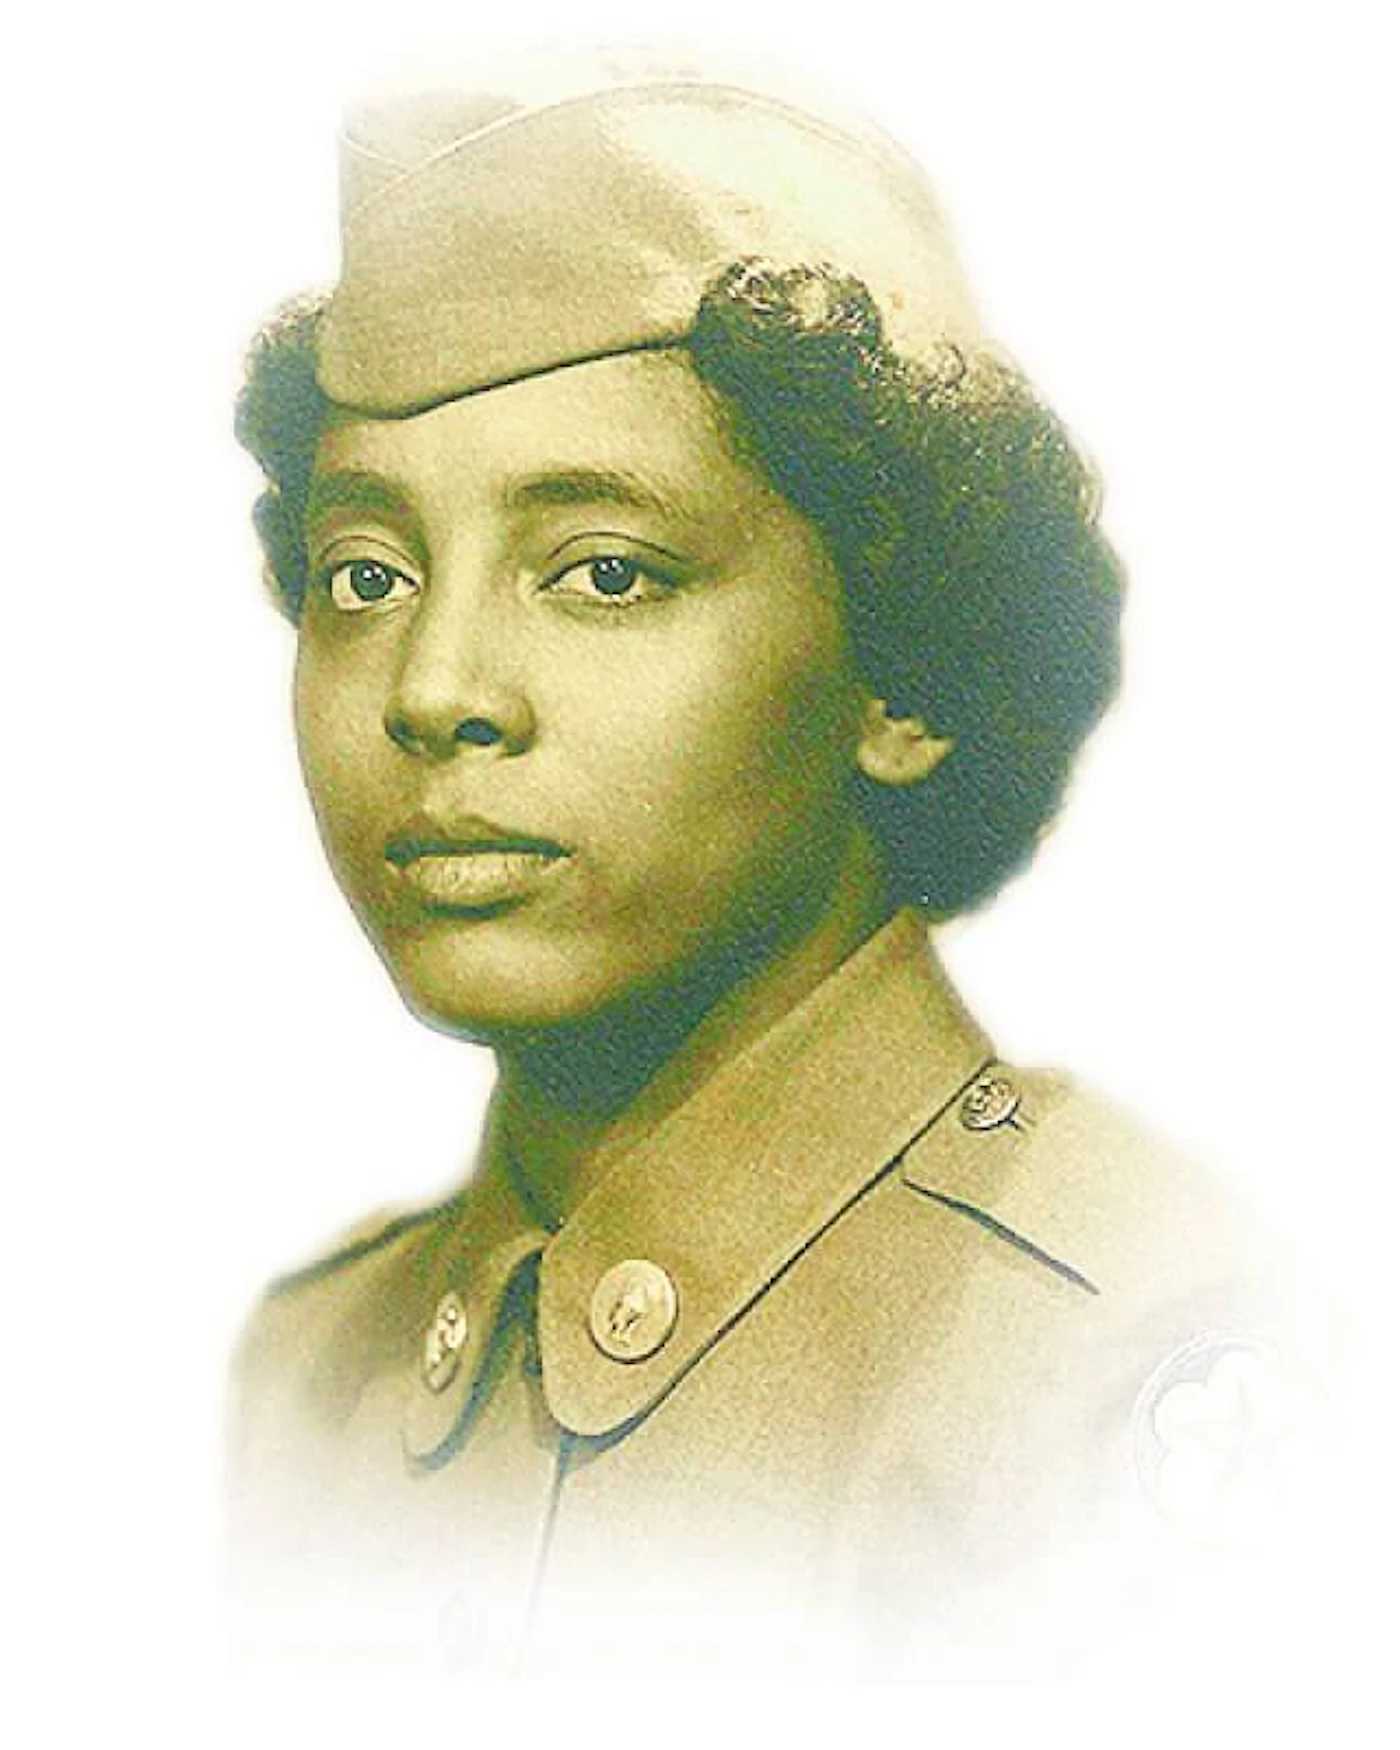 Sarah Keys Evans was serving in the Women's Army Corps in 1952 when she was arrested after refusing to give up her bus seat for a white Marine at the Roanoke Rapids bus station. Her lawsuit would go on to change the country.  (Image via US Army.)